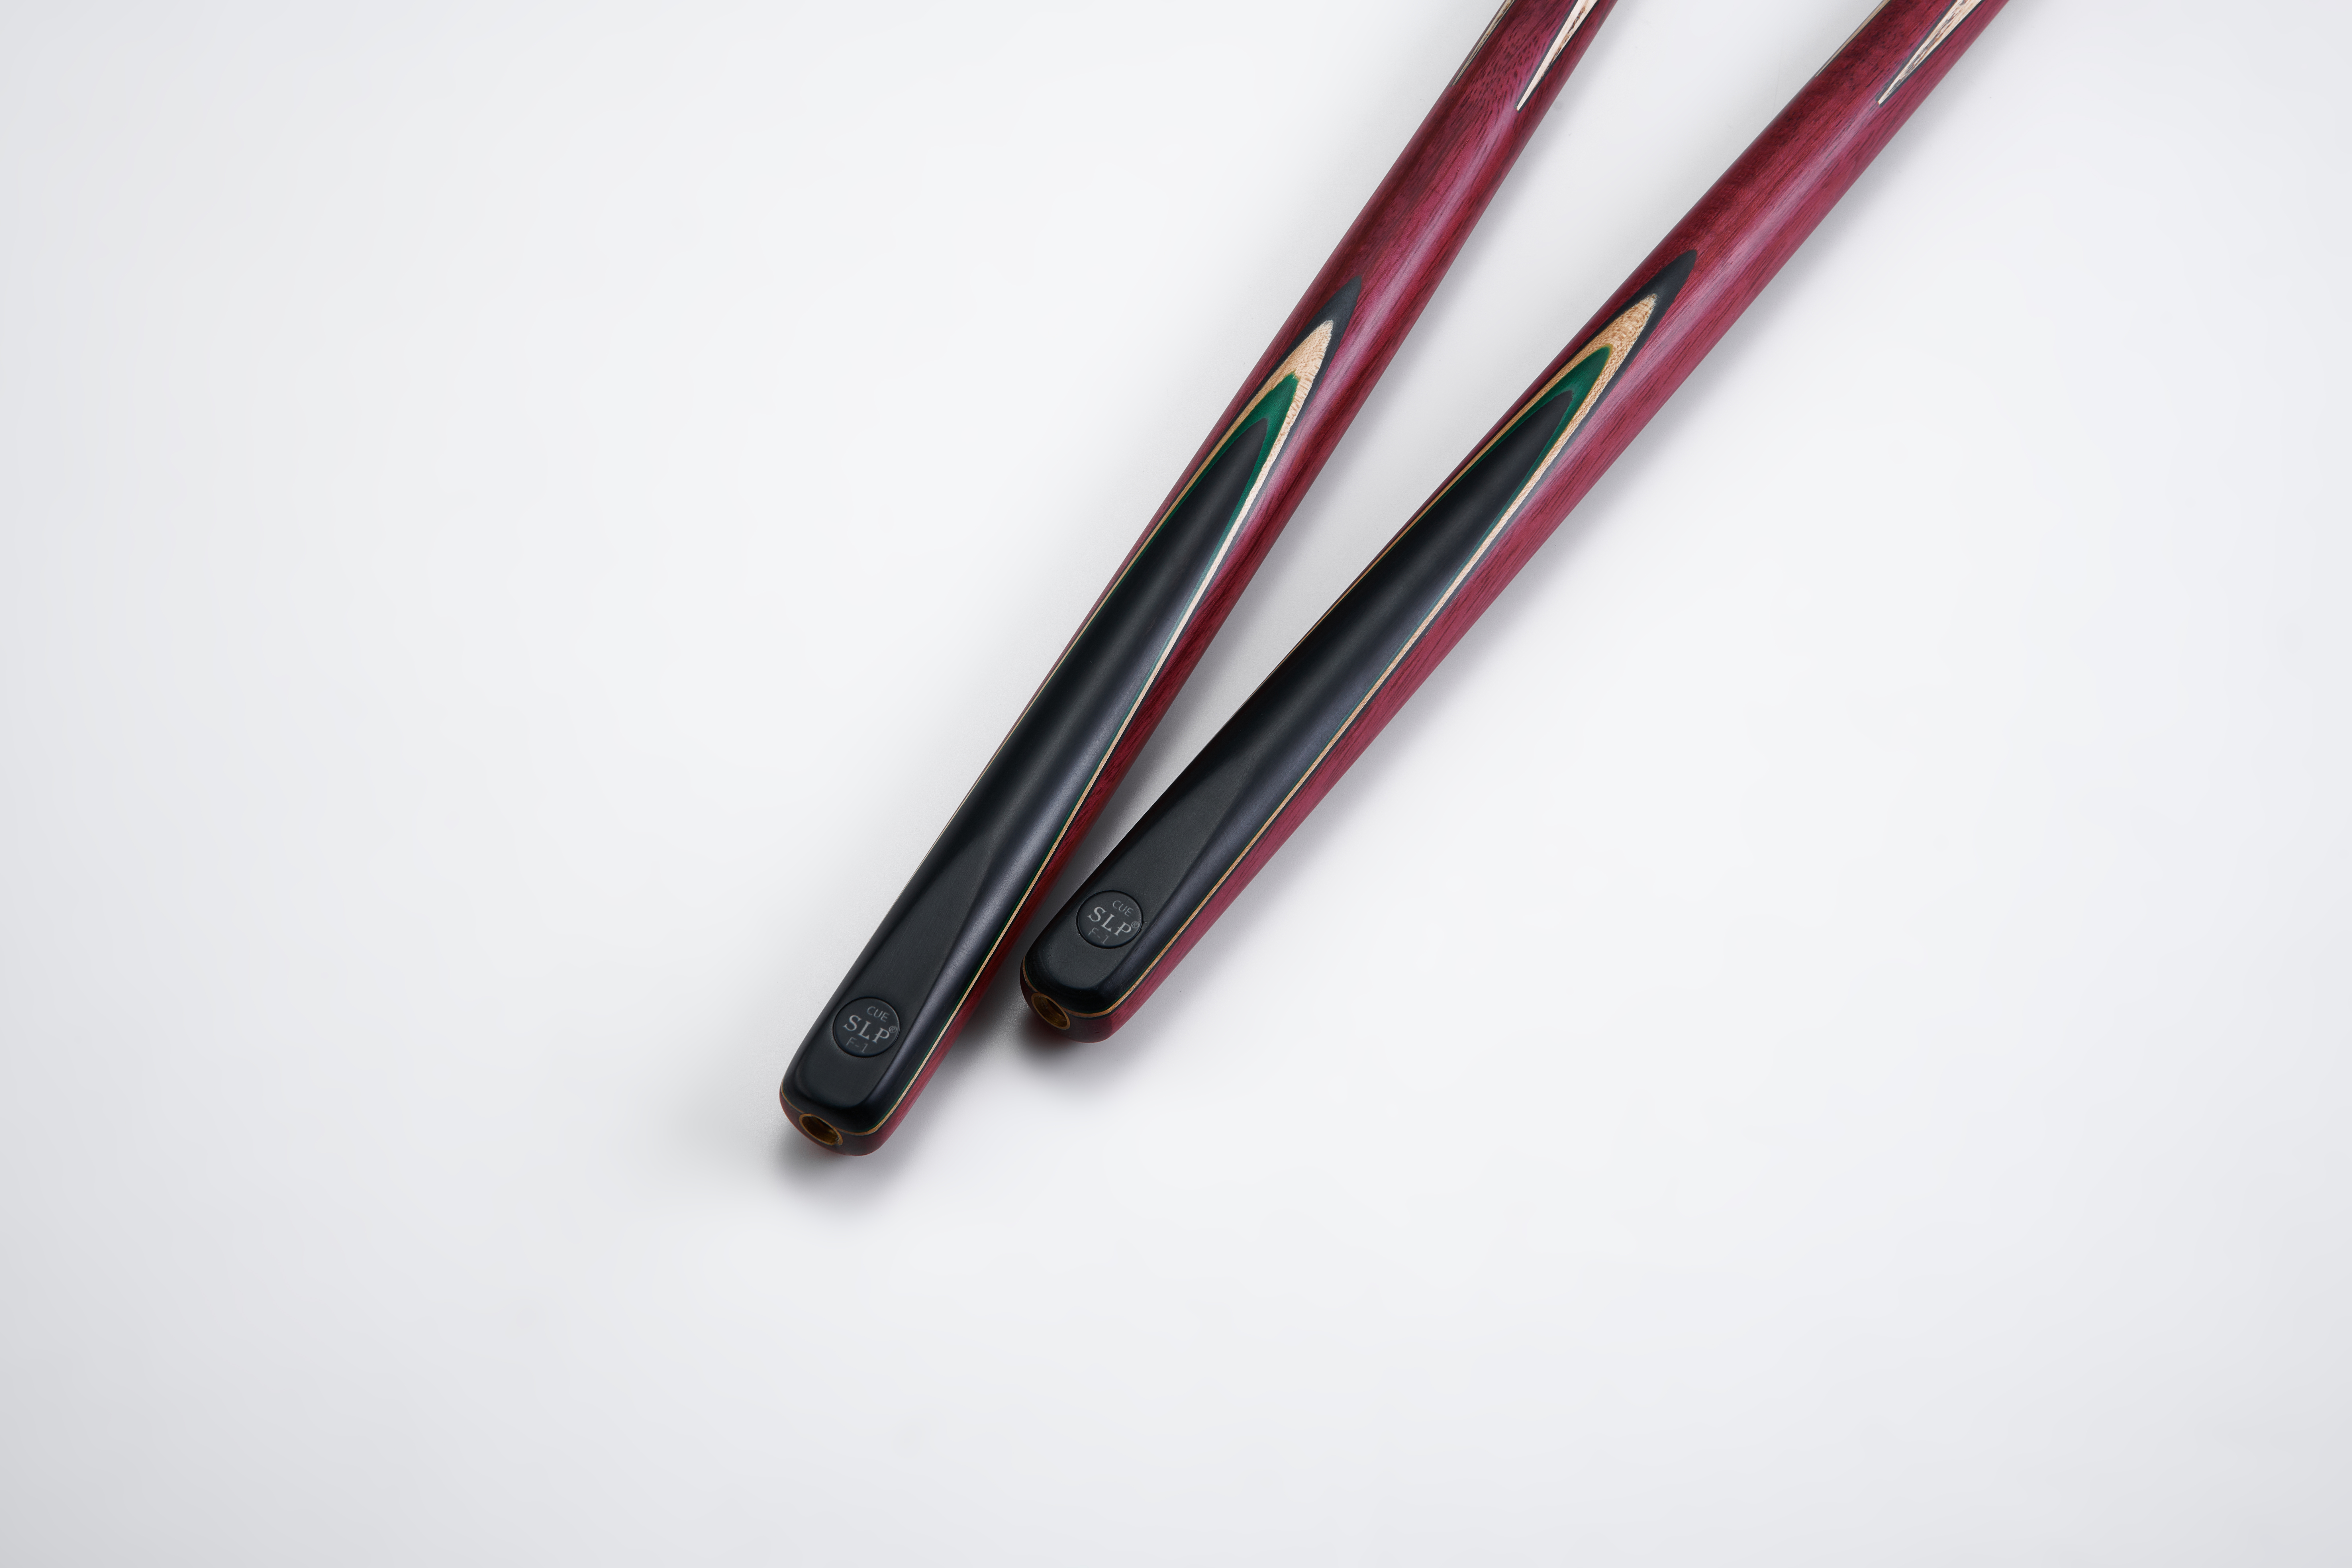 The Ultimate Guide to Choosing the Best Snooker Cue